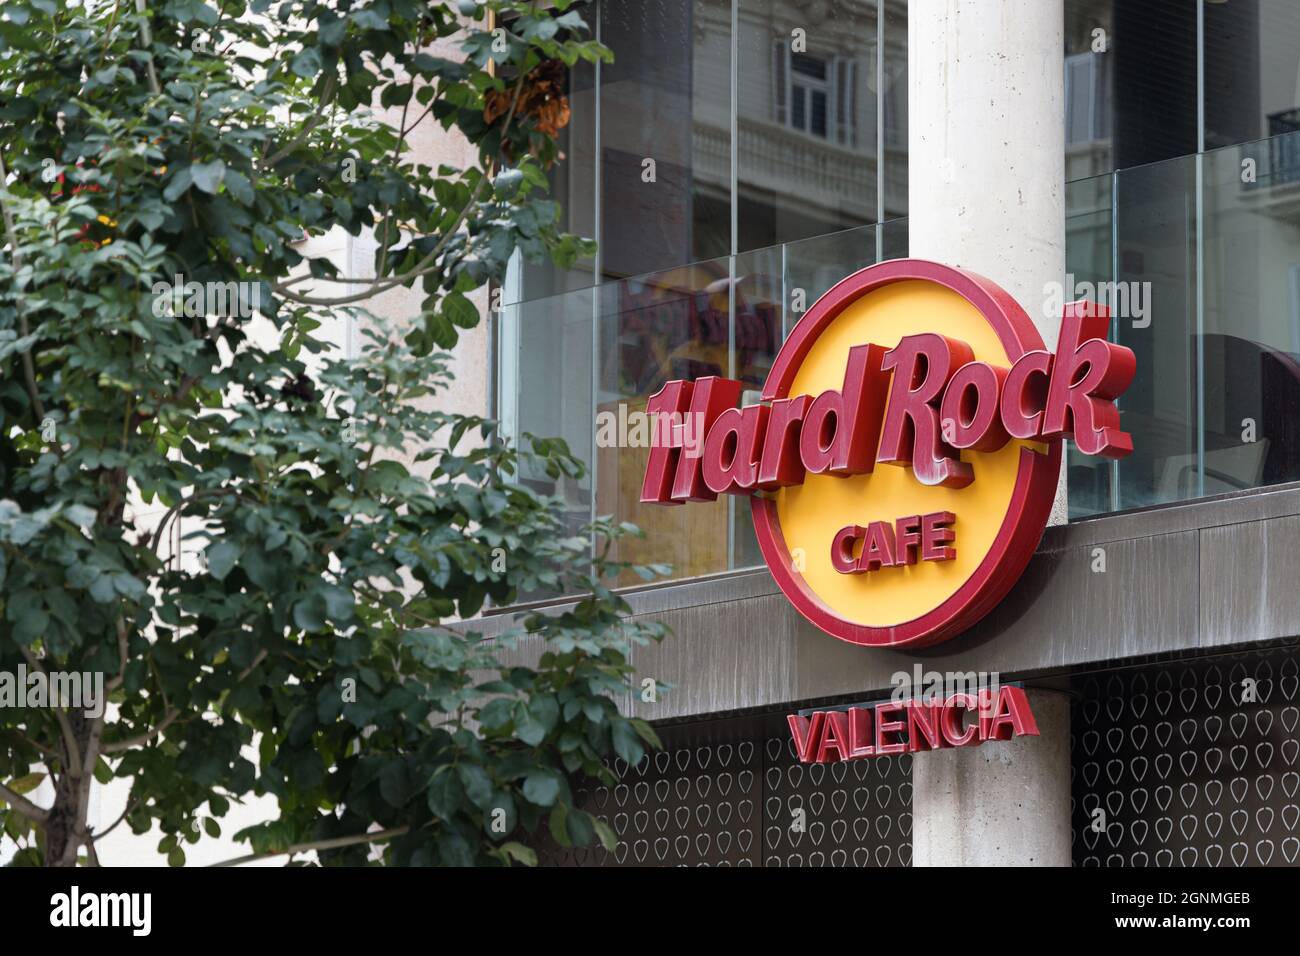 VALENCIA, SPAIN - SEPTEMBER 25, 2021: Hard Rock Cafe is a chain of theme restaurants founded in 1971 Stock Photo